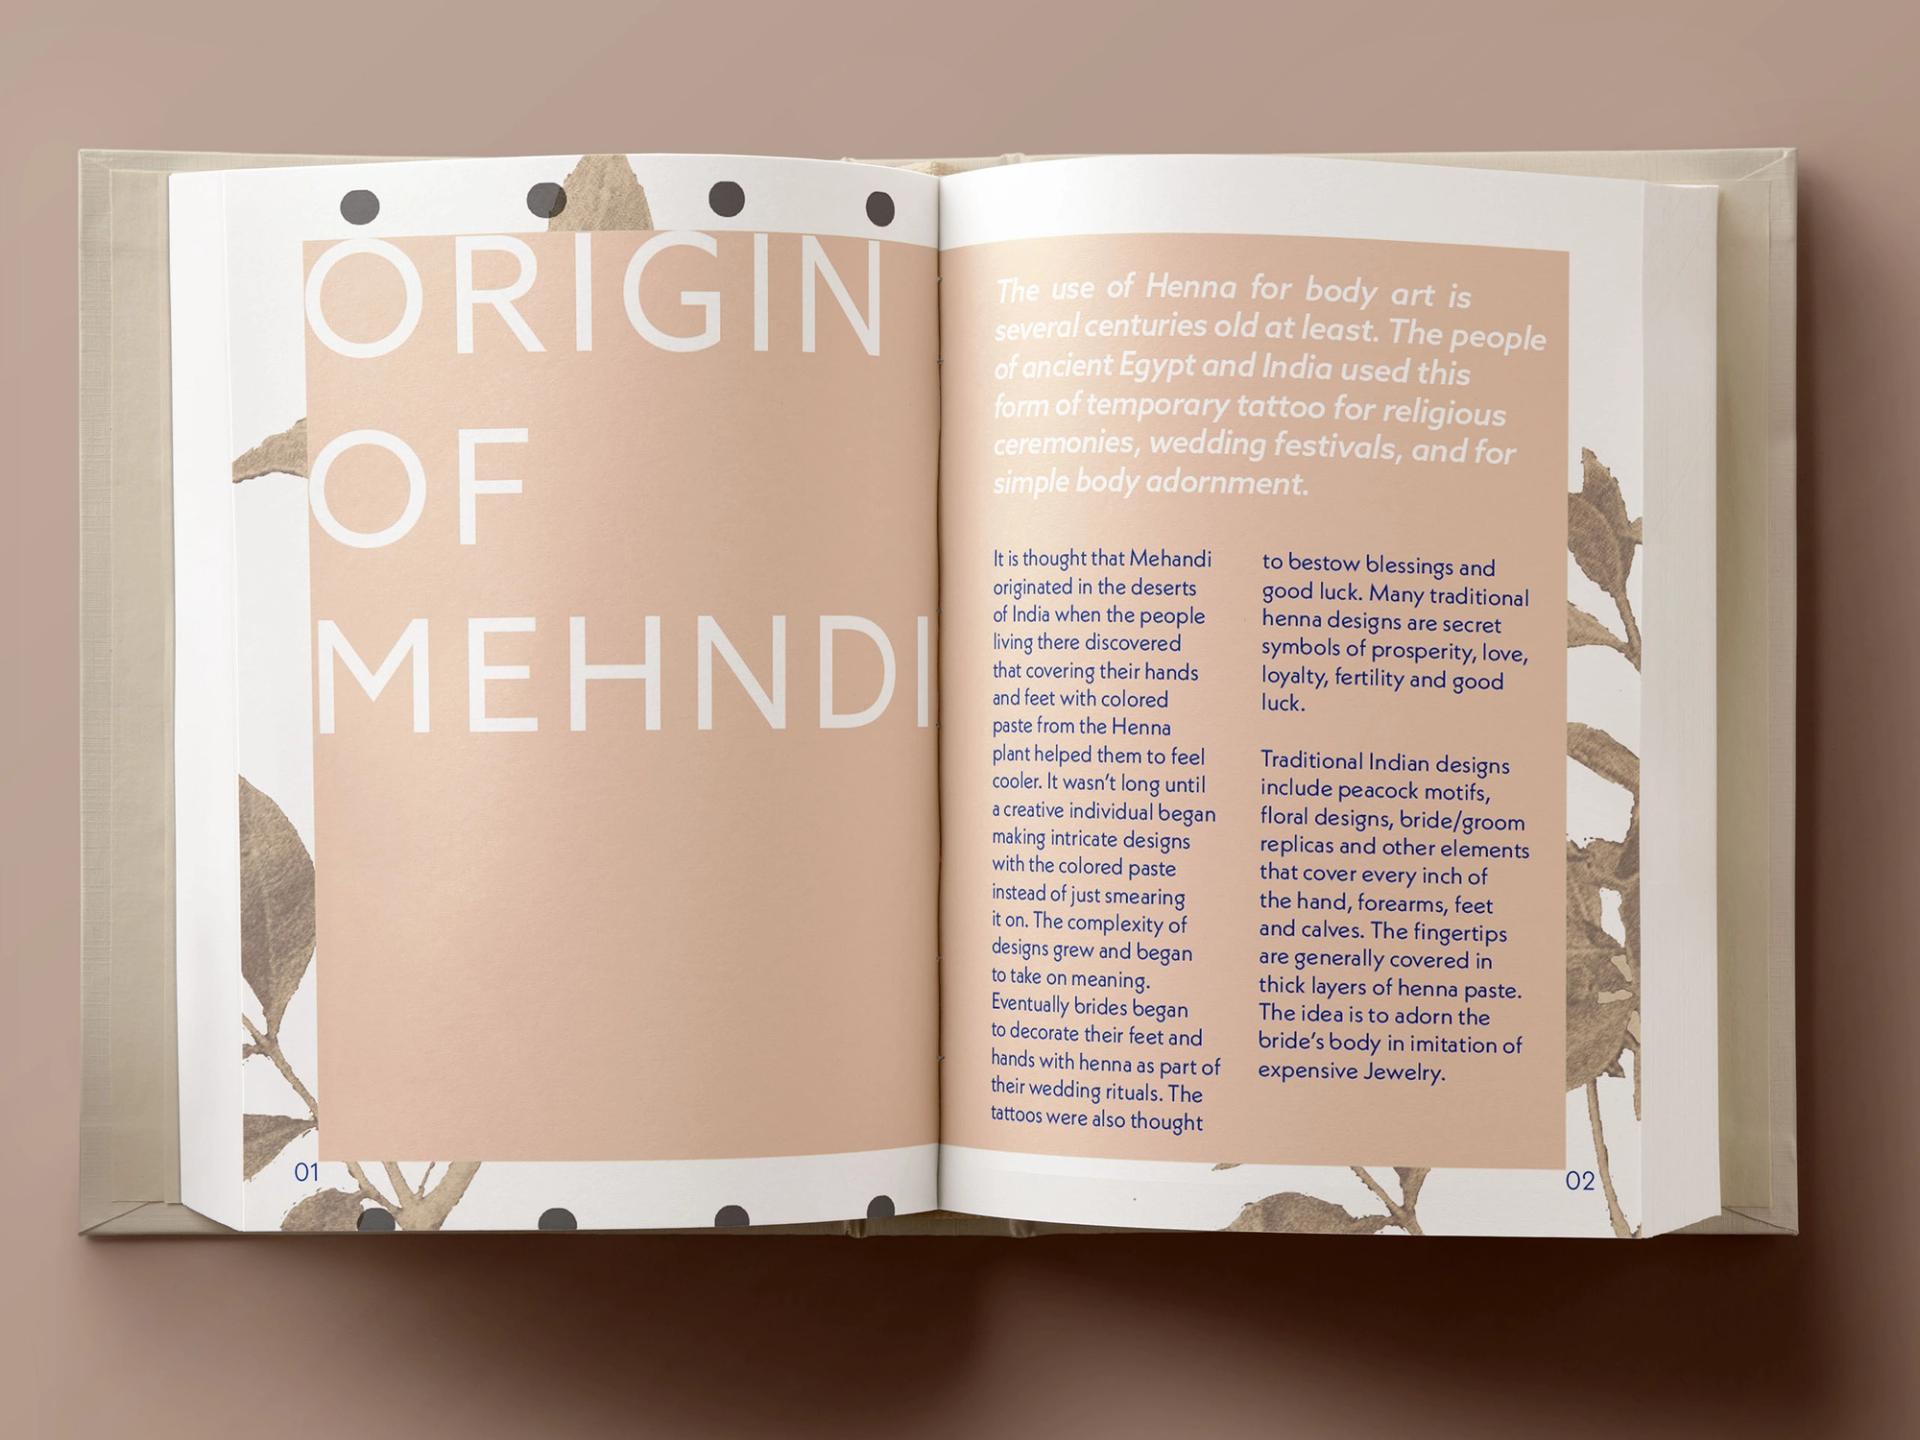 The significance of Mehdi